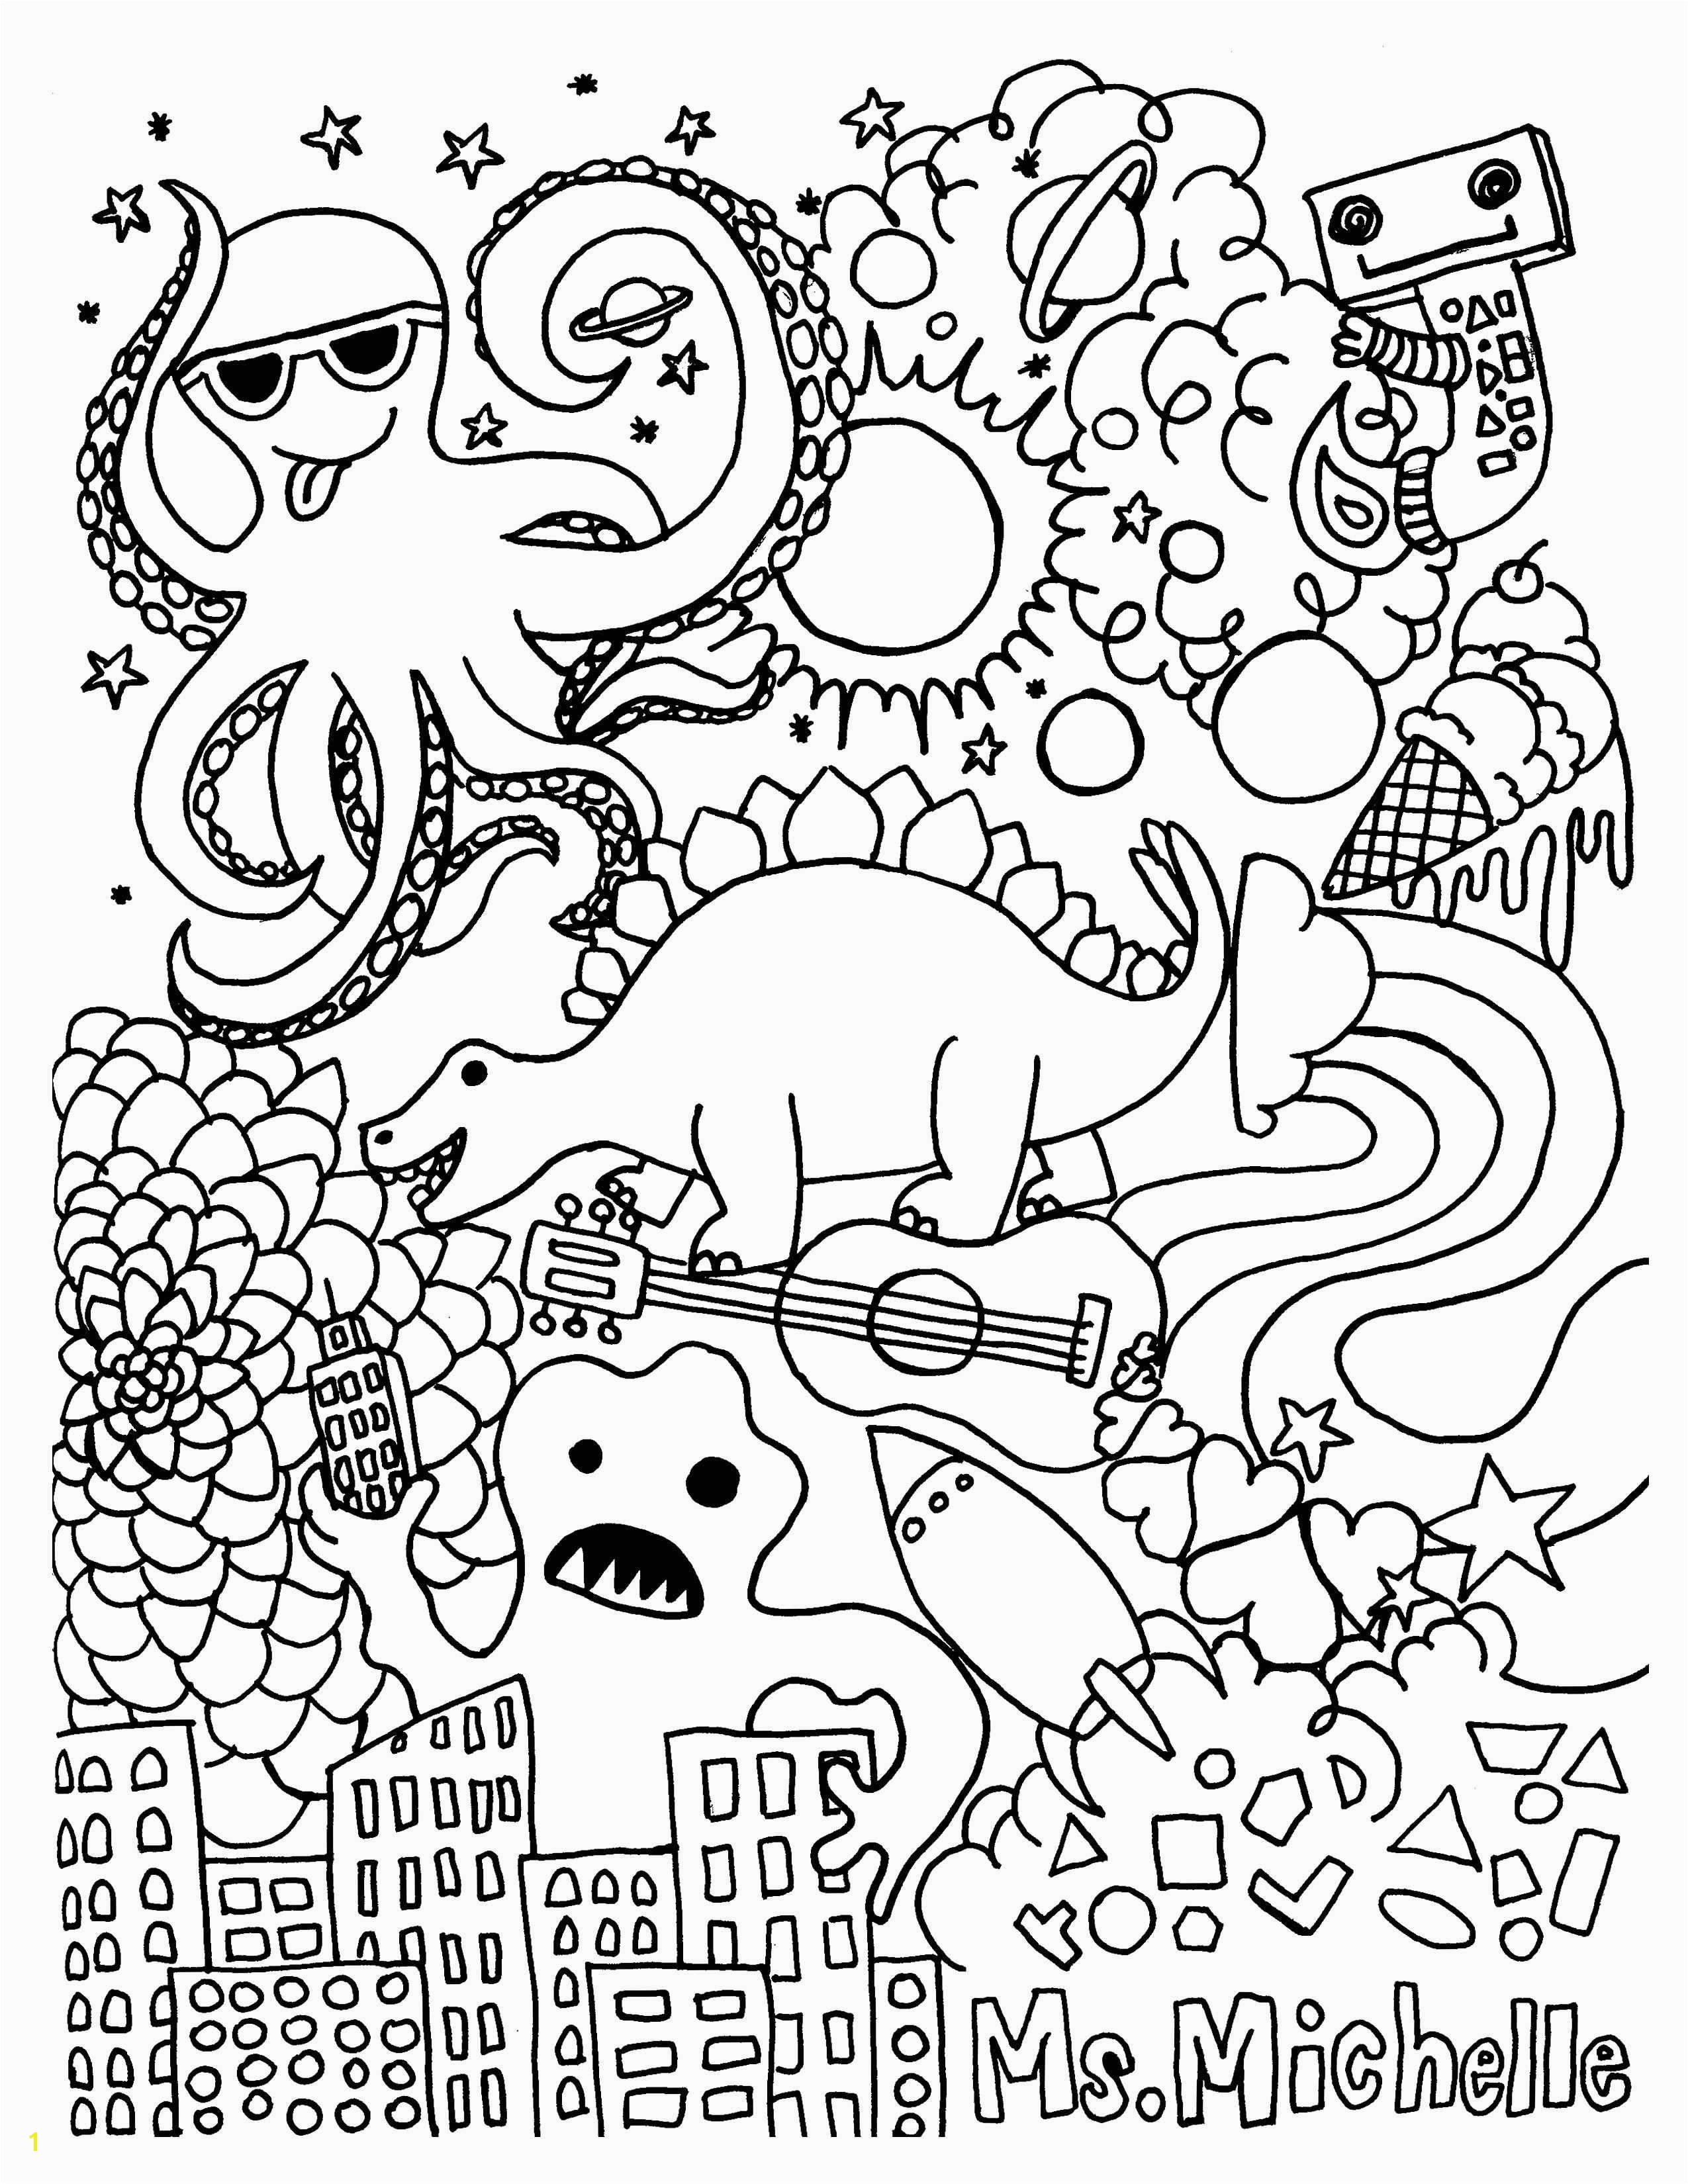 Free Coloring Pages Bible Awesome Free Coloring Pages For Halloween Unique Best Coloring Page Adult Od